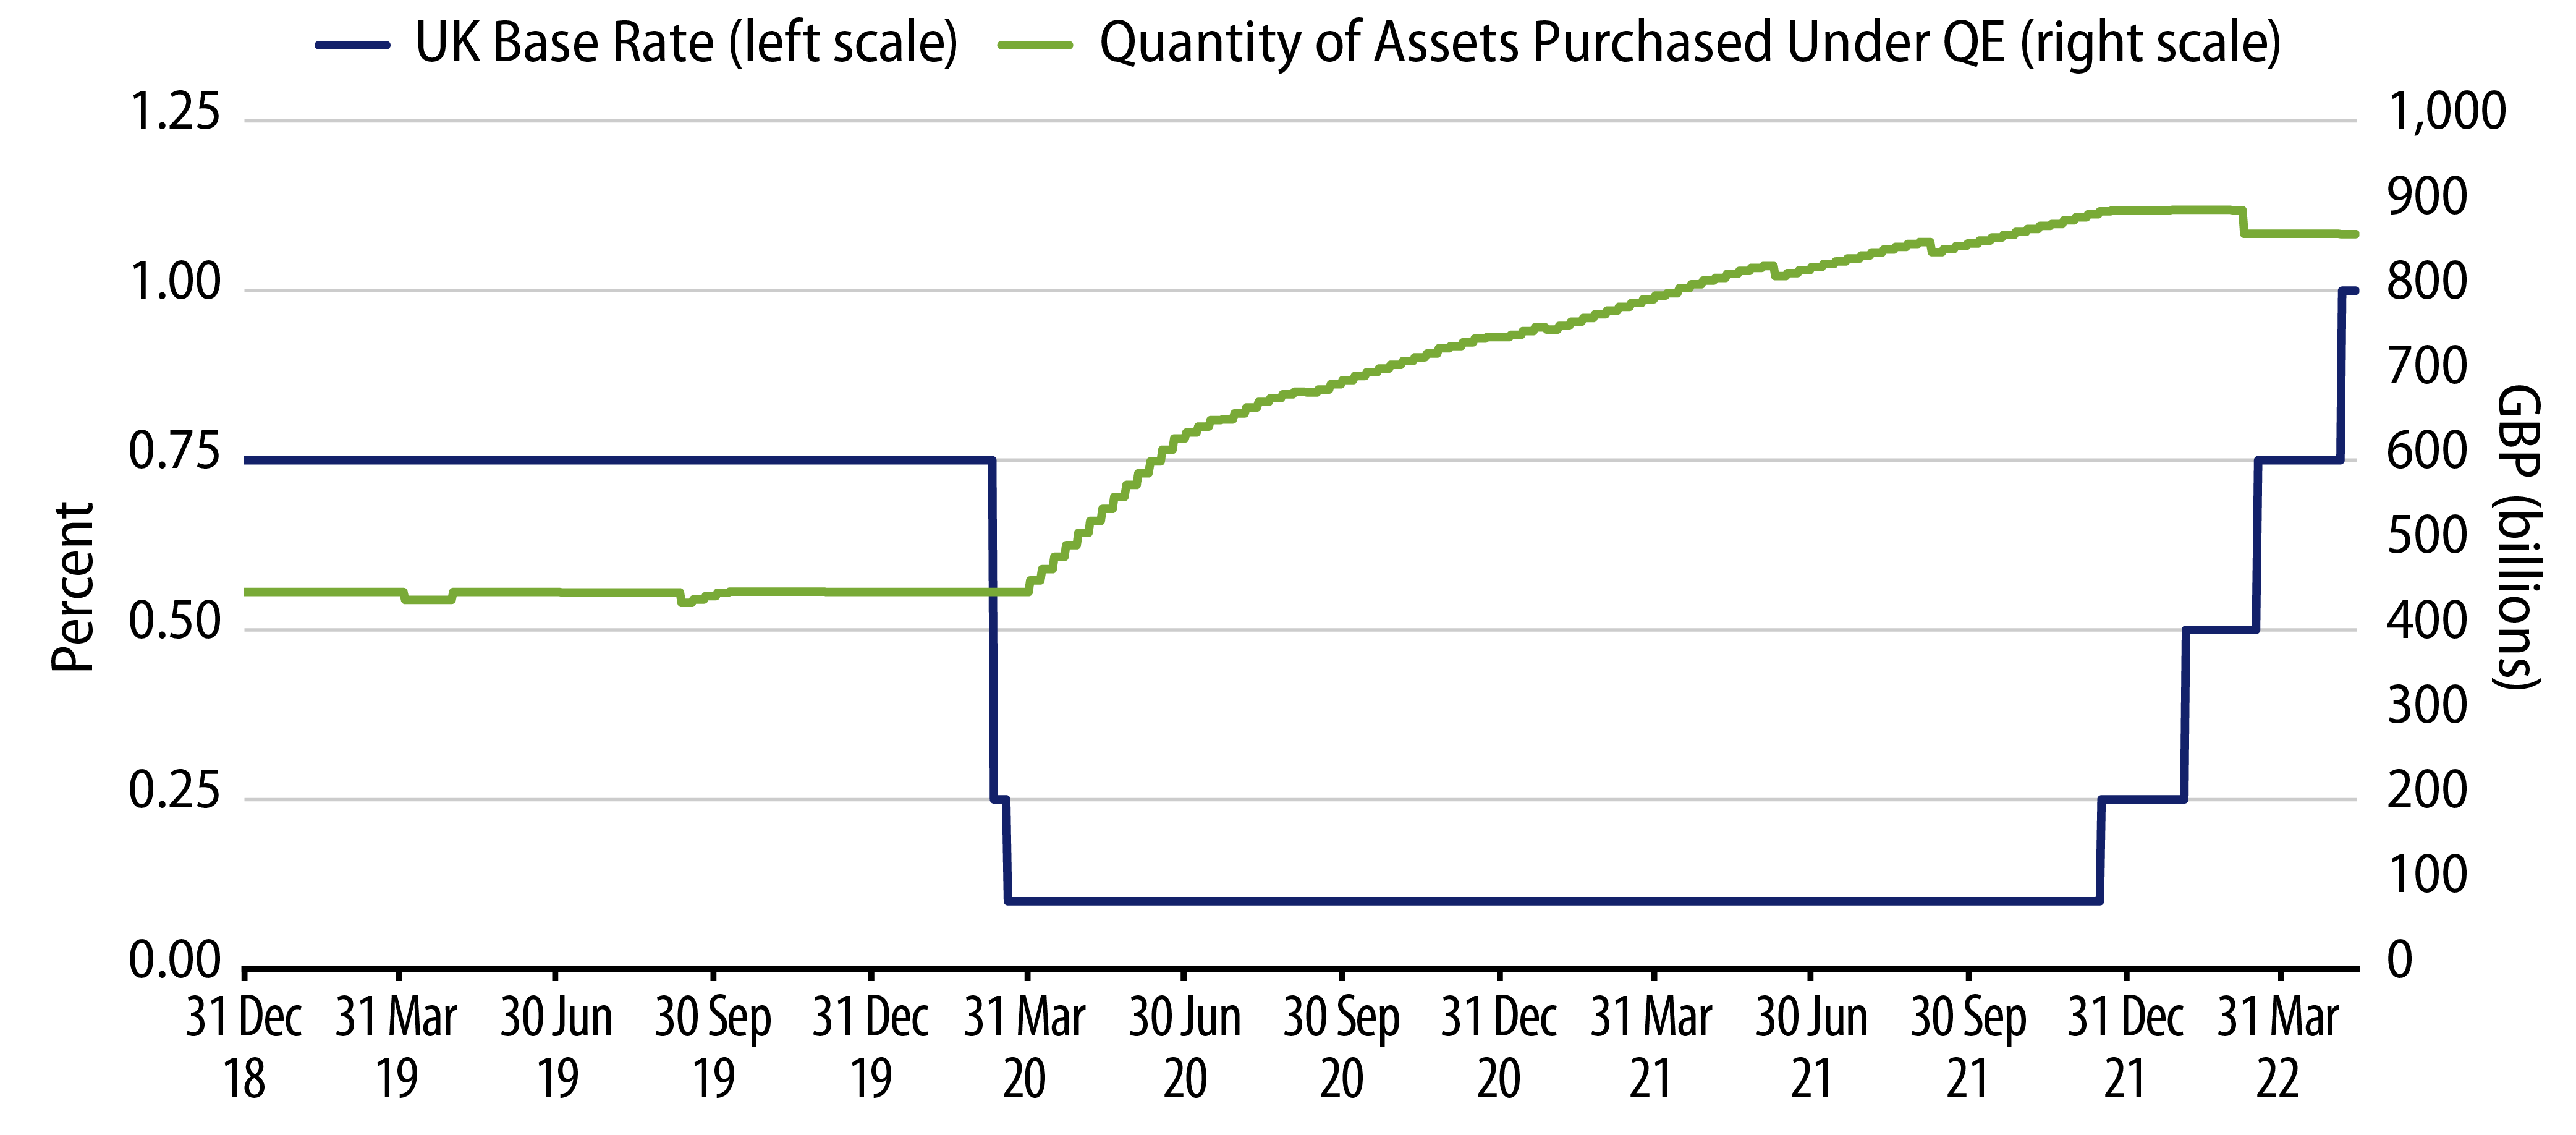 The Bank of England’s Base Rate and Asset Purchase History